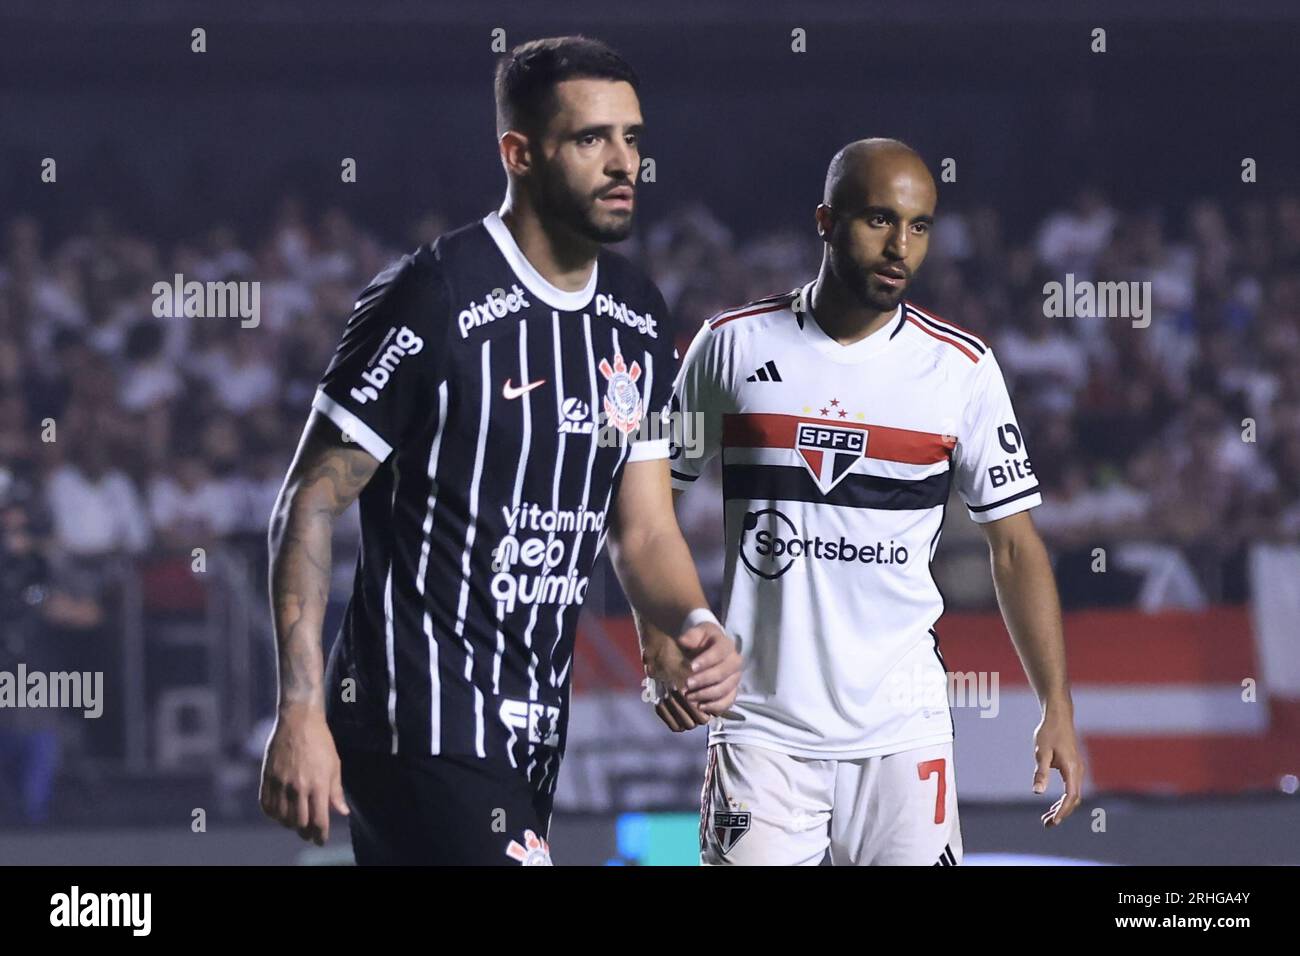 Sao Paulo, Brazil. 16th Aug, 2023. SP - SAO PAULO - 08/16/2023 - COPA DO BRASIL 2023, SAO PAULO X CORINTHIANS - Lucas Moura player from Sao Paulo competes with Renato Augusto player from Corinthians during a match at Morumbi stadium for the 2023 Copa do Brasil championship. Photo: Marcello Zambrana/AGIF Credit: AGIF/Alamy Live News Stock Photo